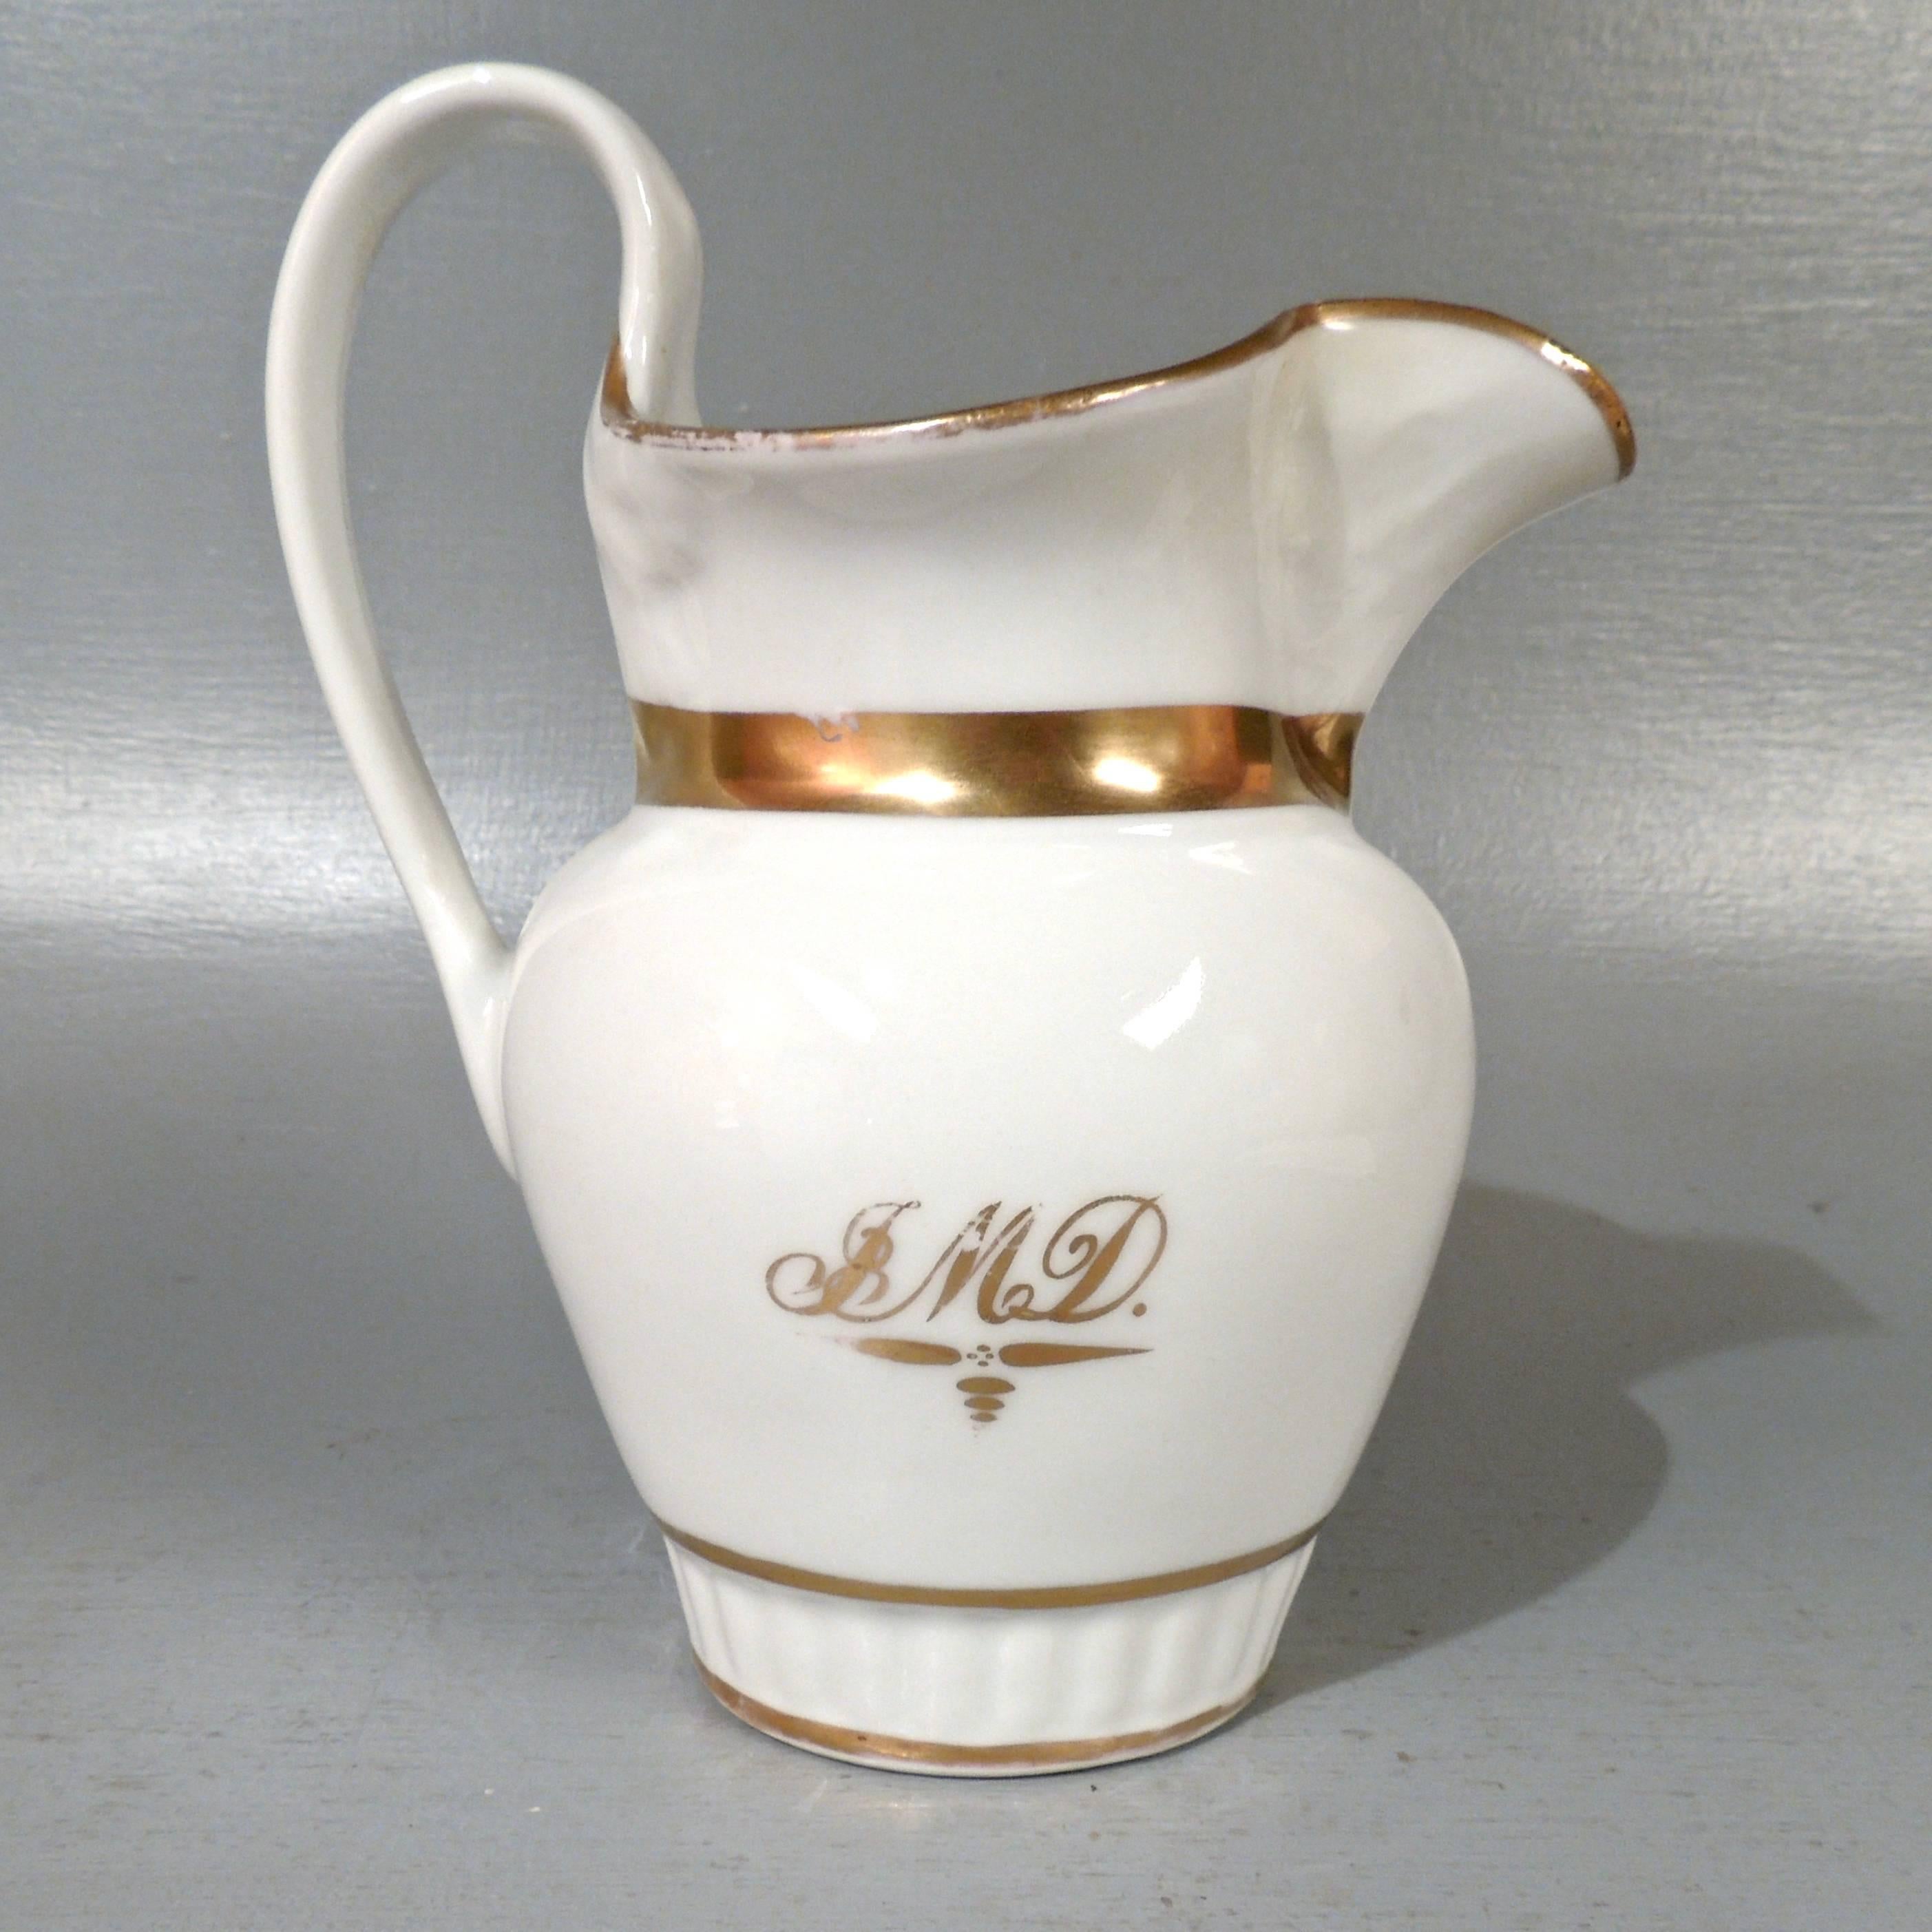 A fine and rare, early 19th century Tucker and Hemphill porcelain pitcher. 

Of Classic form with gilt owner’s monogram and gilt decoration. 
(It is accompanied by an estate note that identifies the original owner as John Martin Davis.)

Tucker